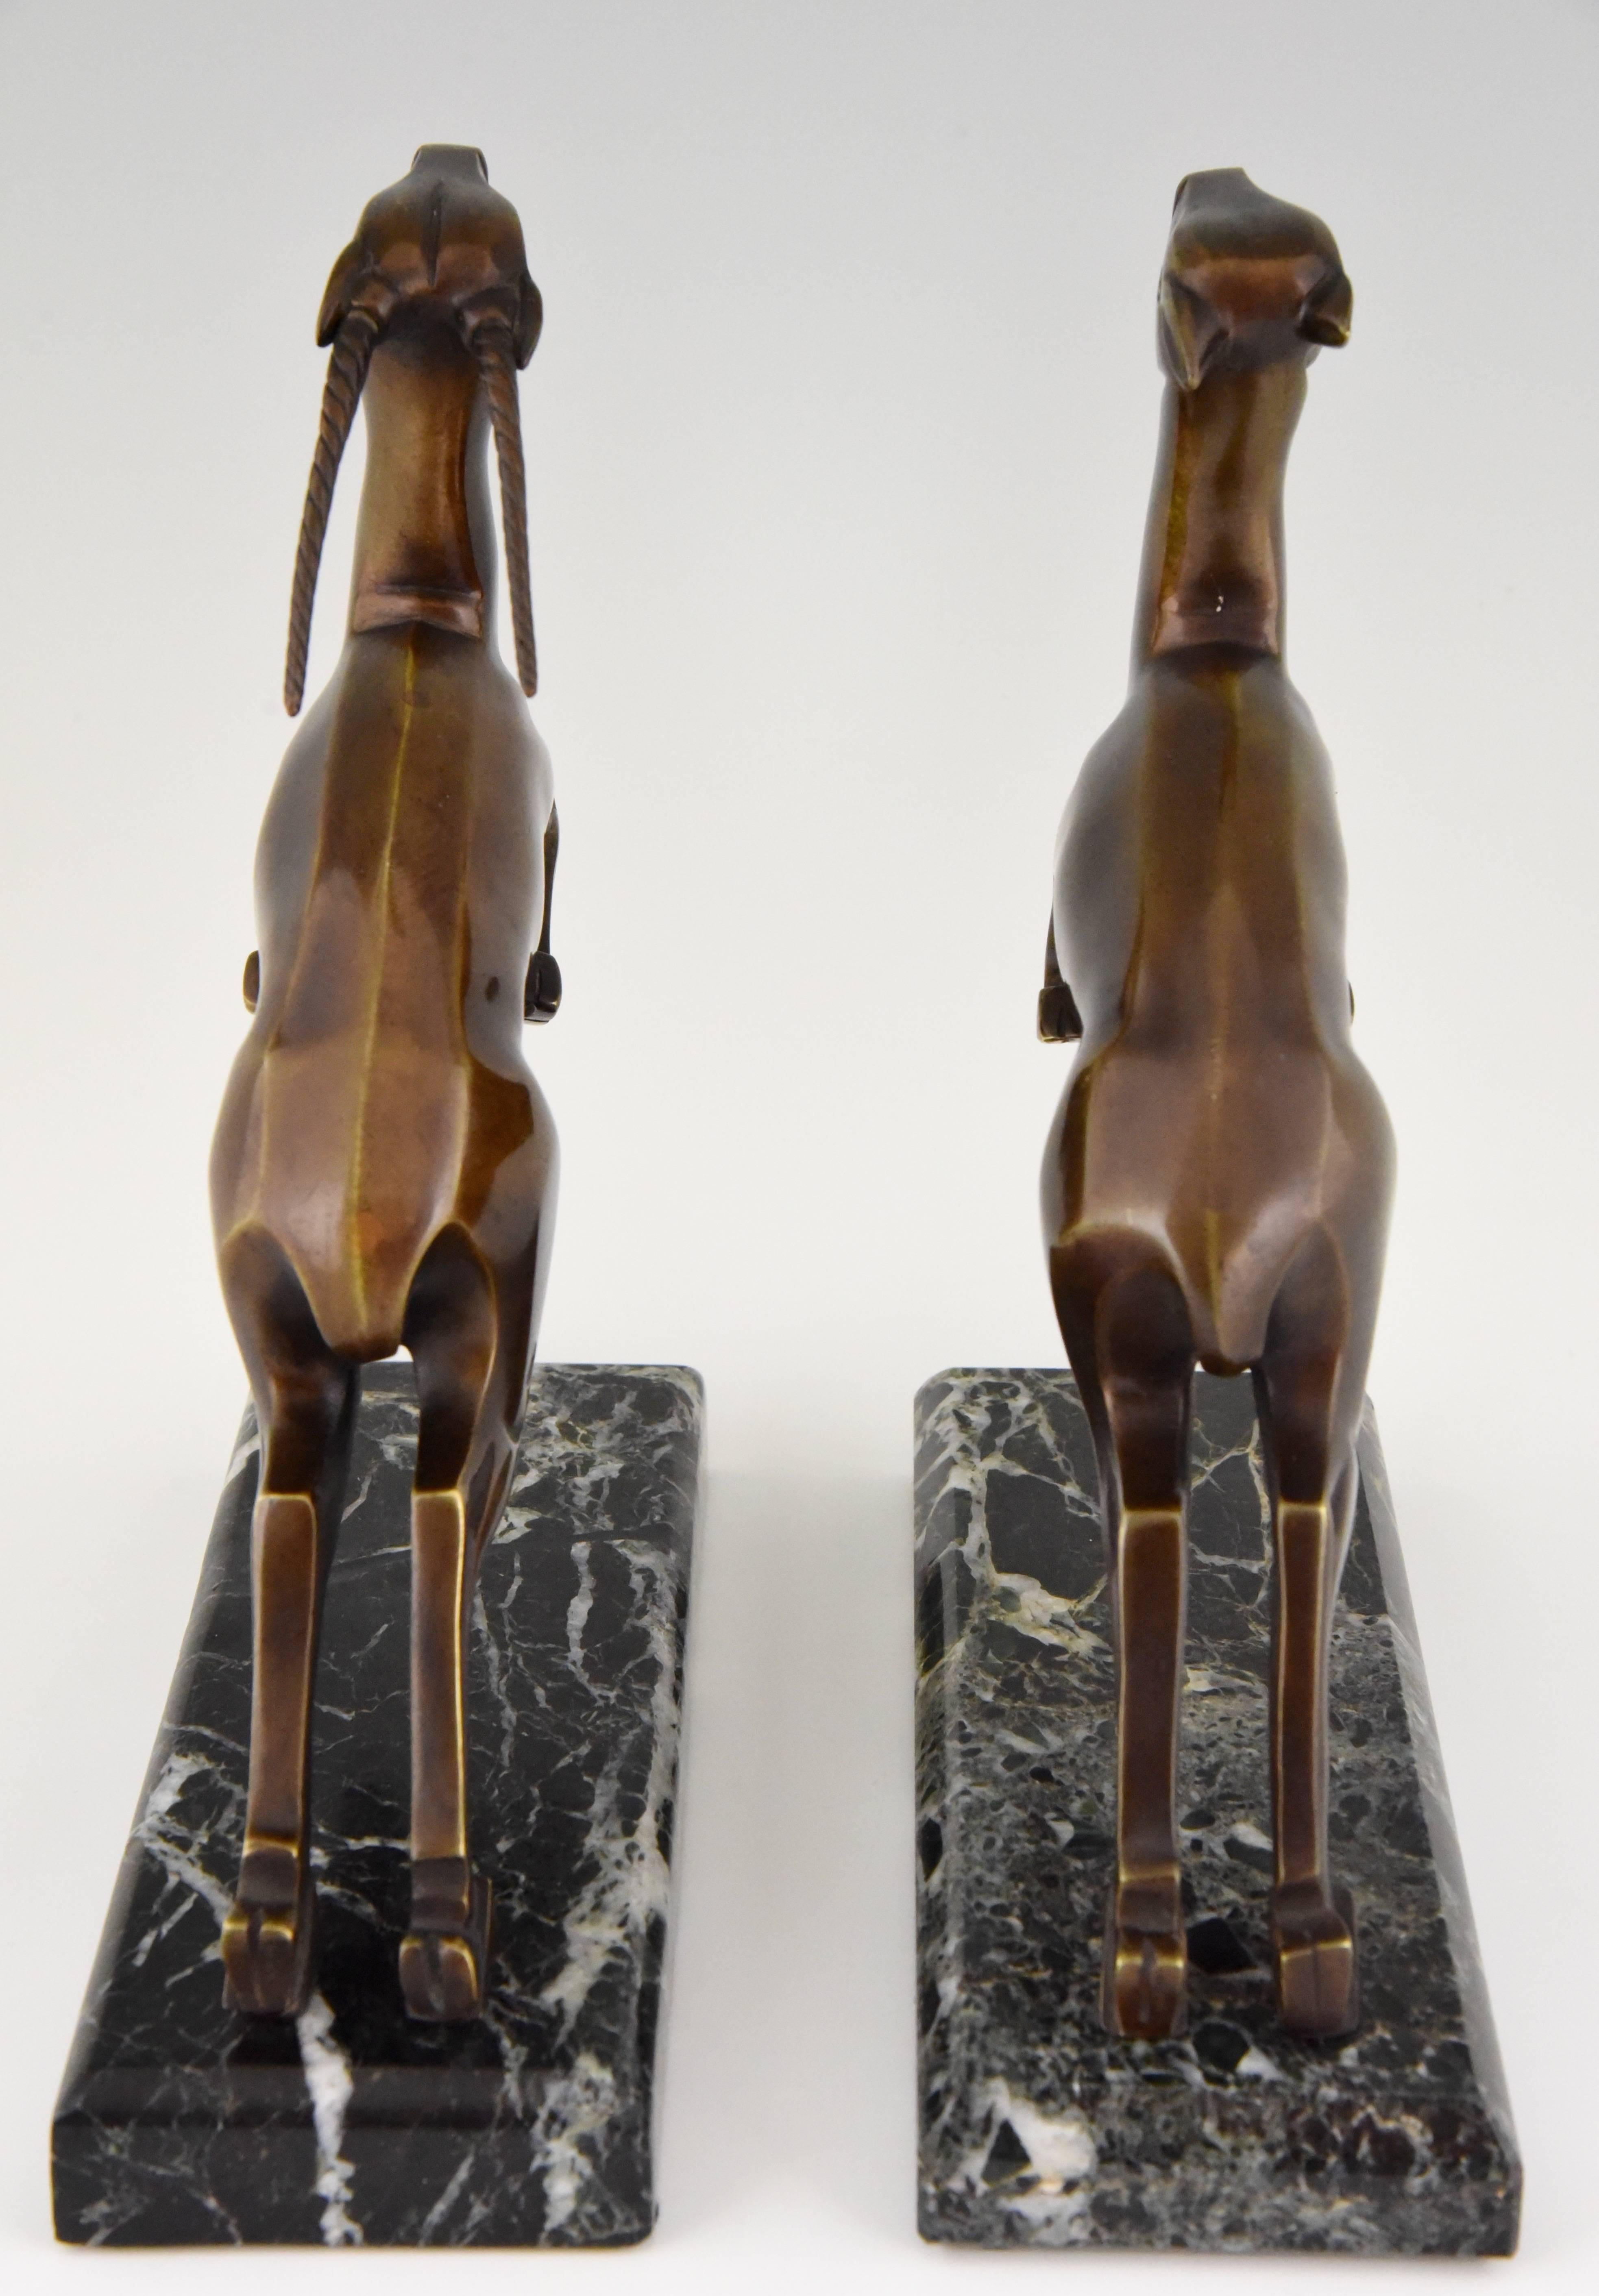 Patinated Art Deco Bronze Leaping Gazelle Bookends by Marcel Andre Bouraine, 1930 France